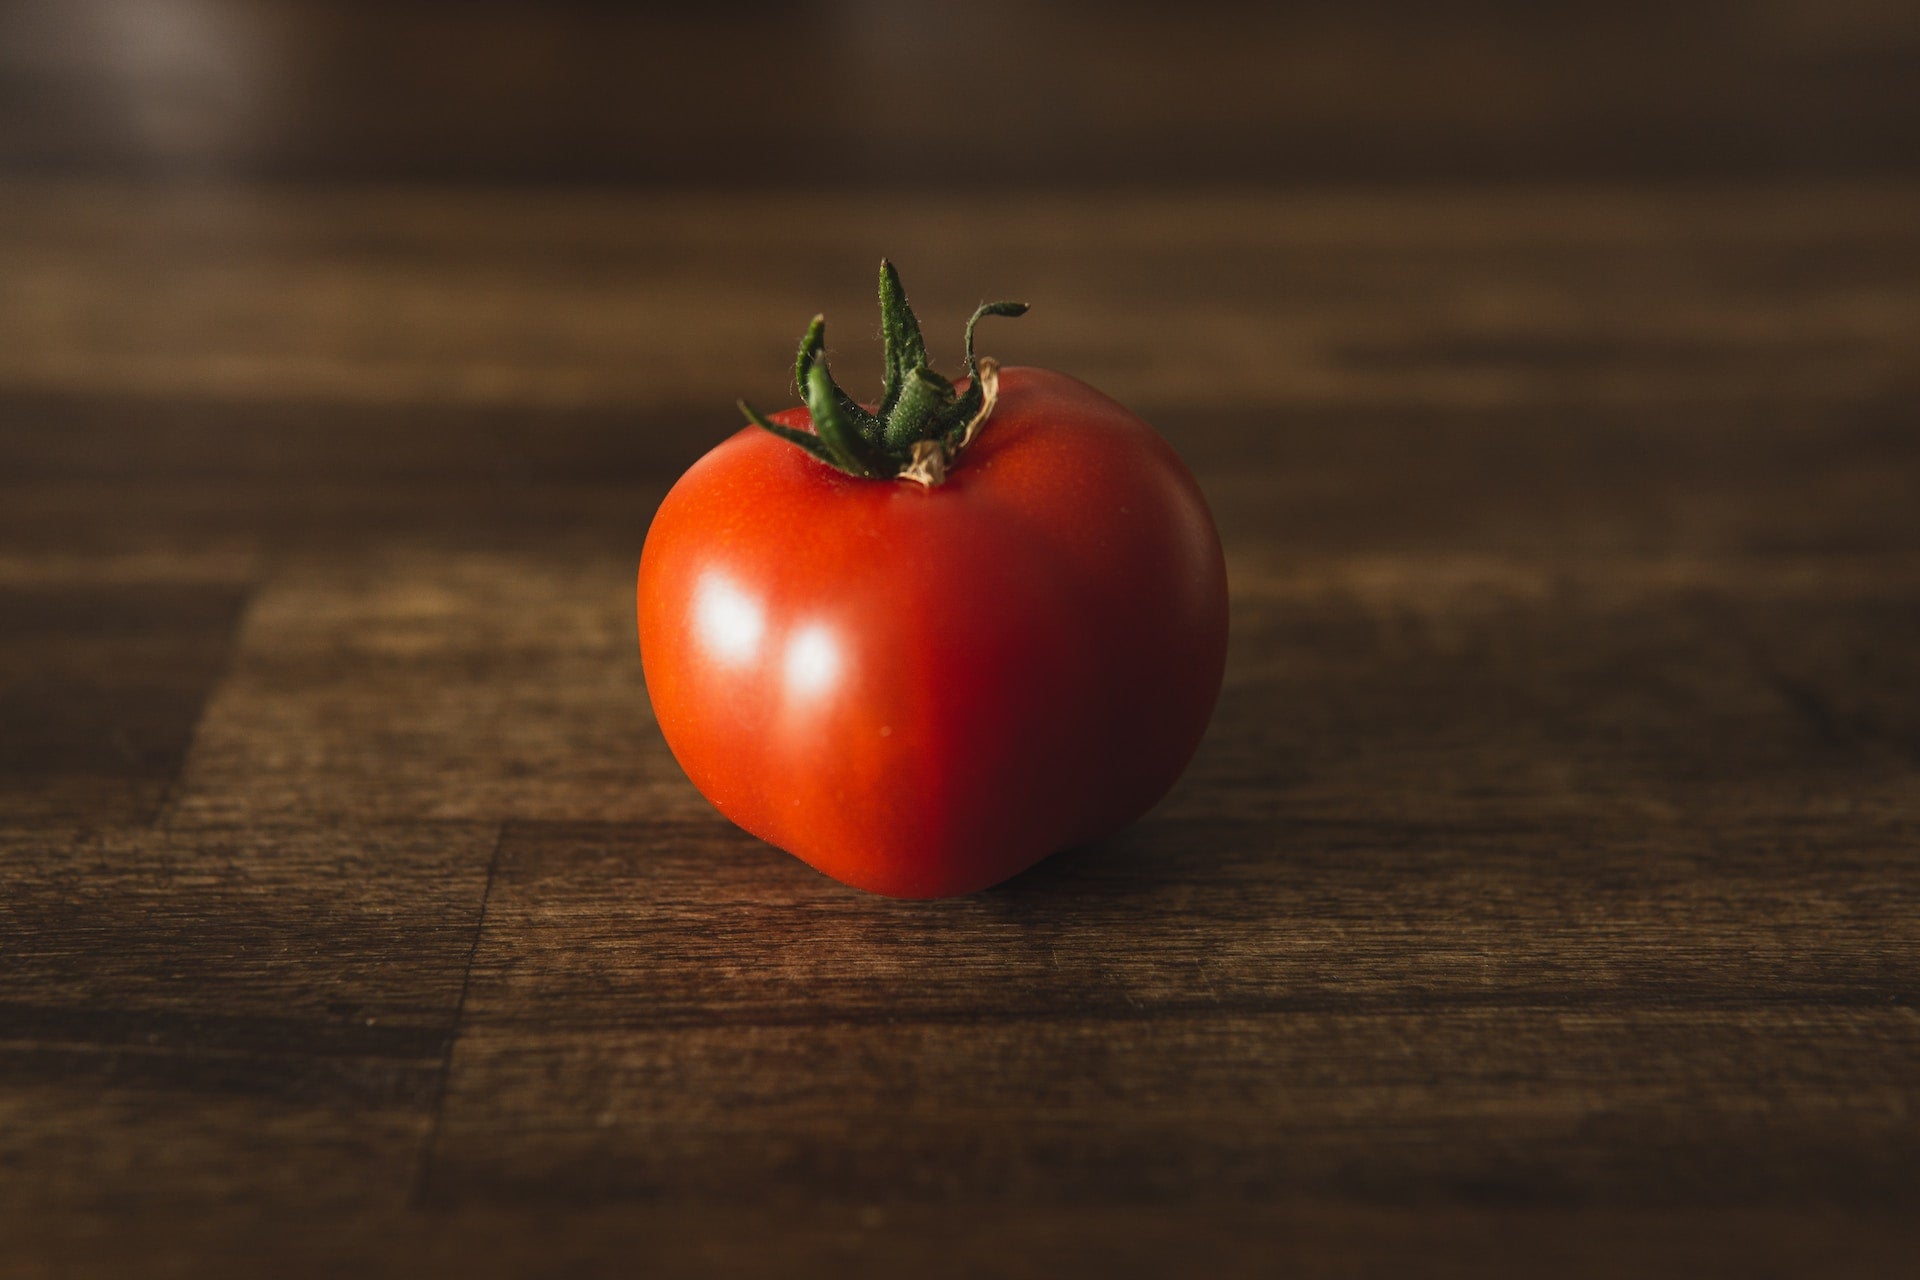 A single tomato, of the variety Slicing Caribe, stands in solitude, crowned with a beautiful green sepal, of which 7 protective green leaves protude. Resting on a stained wooden chopping block, the Slicing Caribe tomato stands in contemplation as to what awaits.